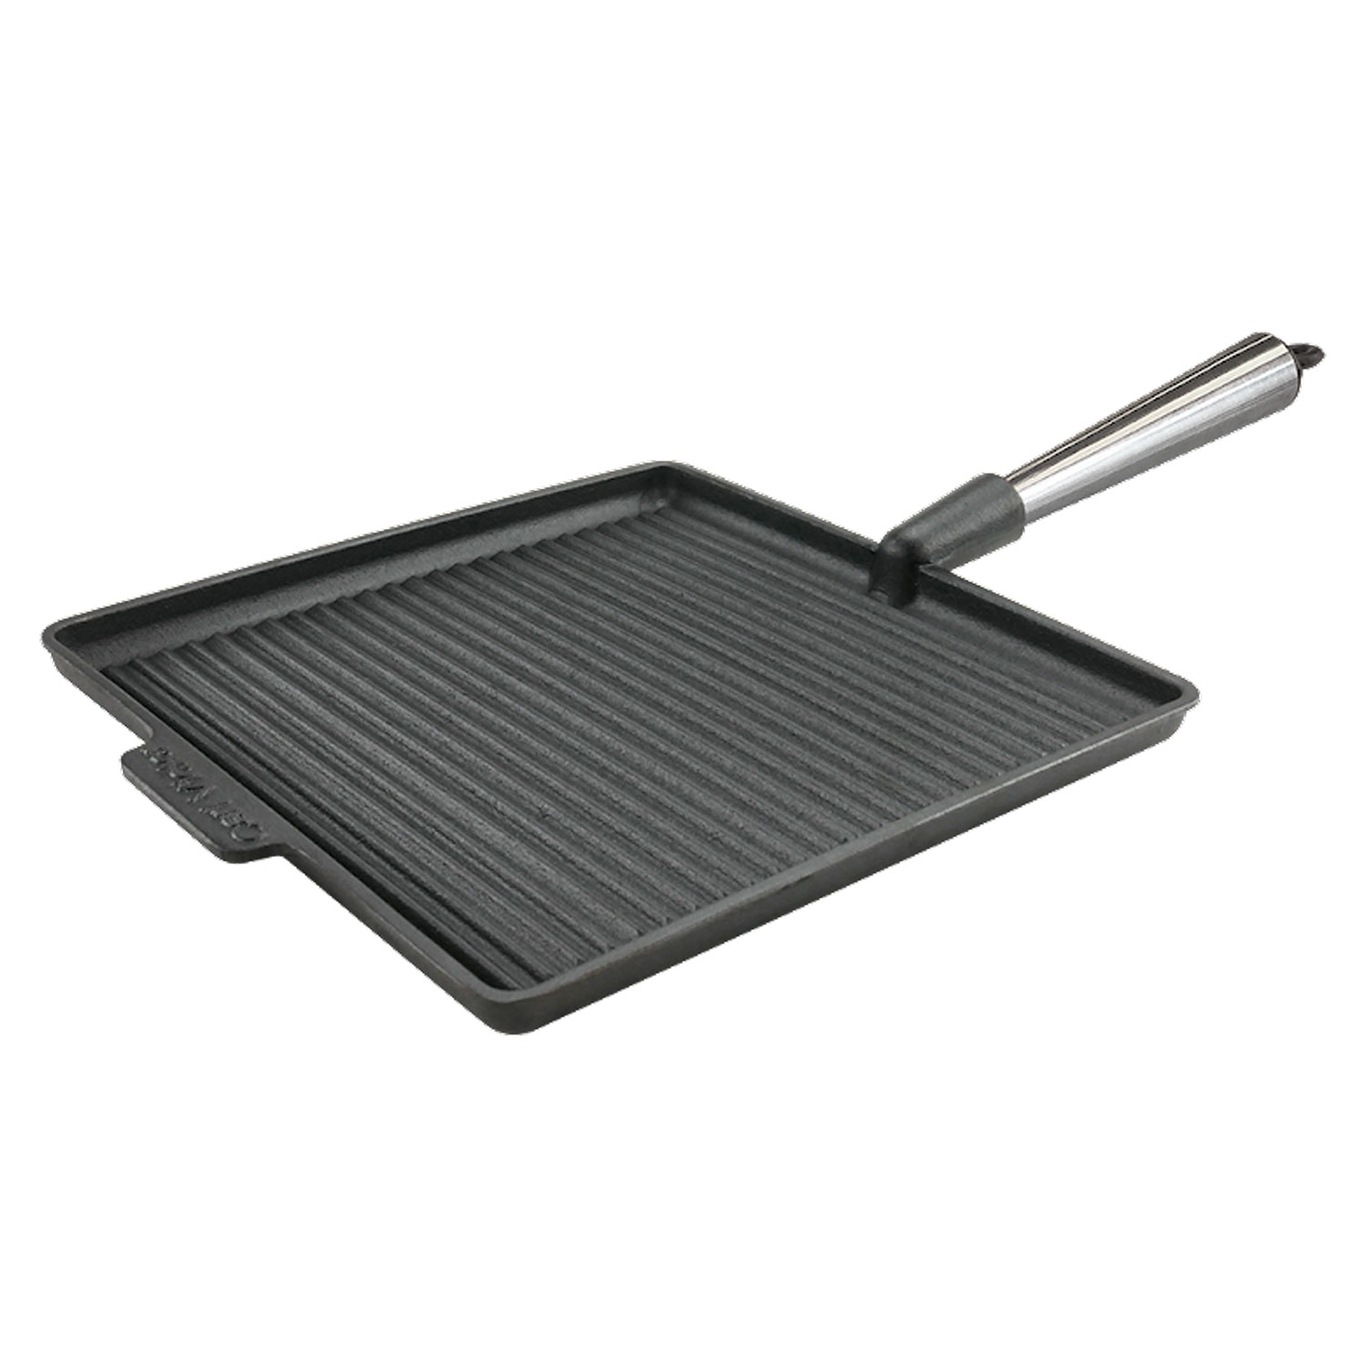 Squared Grill Pan 28x28 cm With Steel Handle